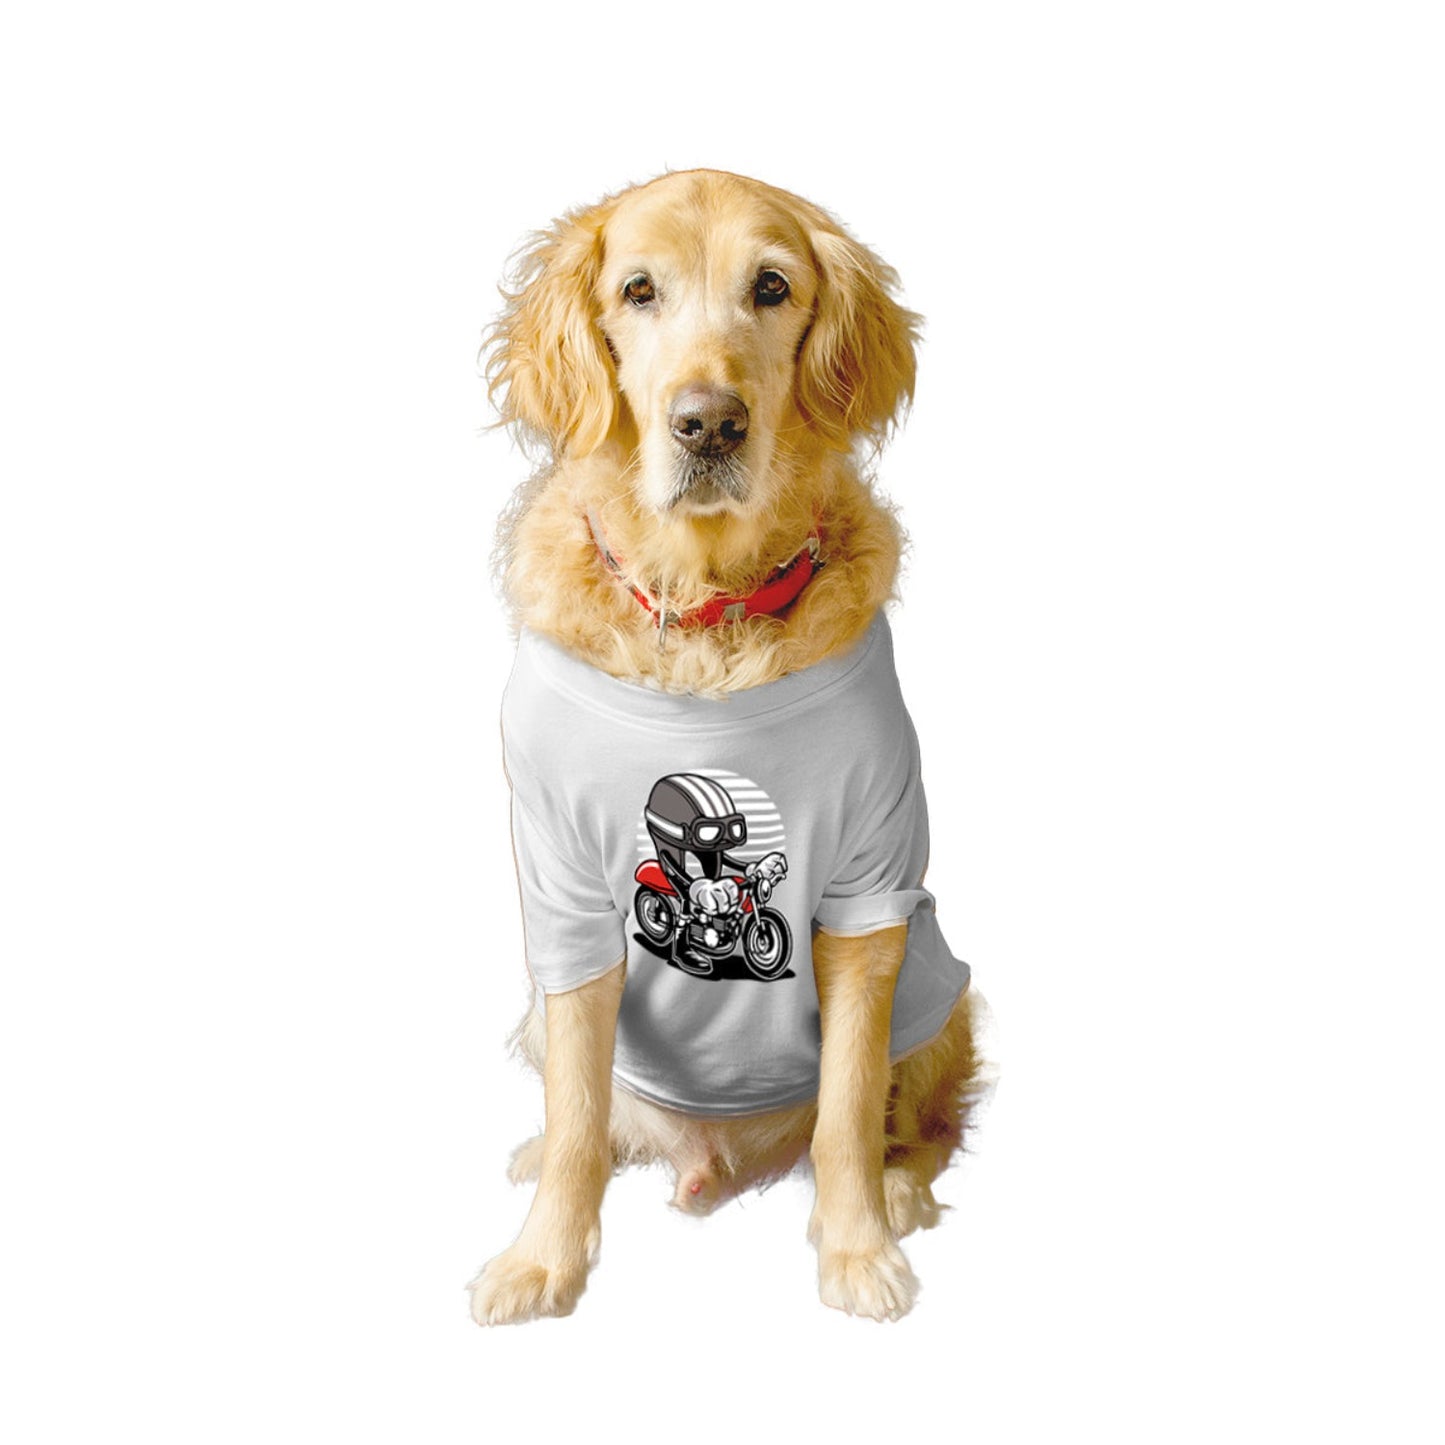 Ruse XX-Small (Chihuahuas, Papillons) / White Ruse Basic Crew Neck "Cafe Racer Helmet" Printed Half Sleeves Dog Tee